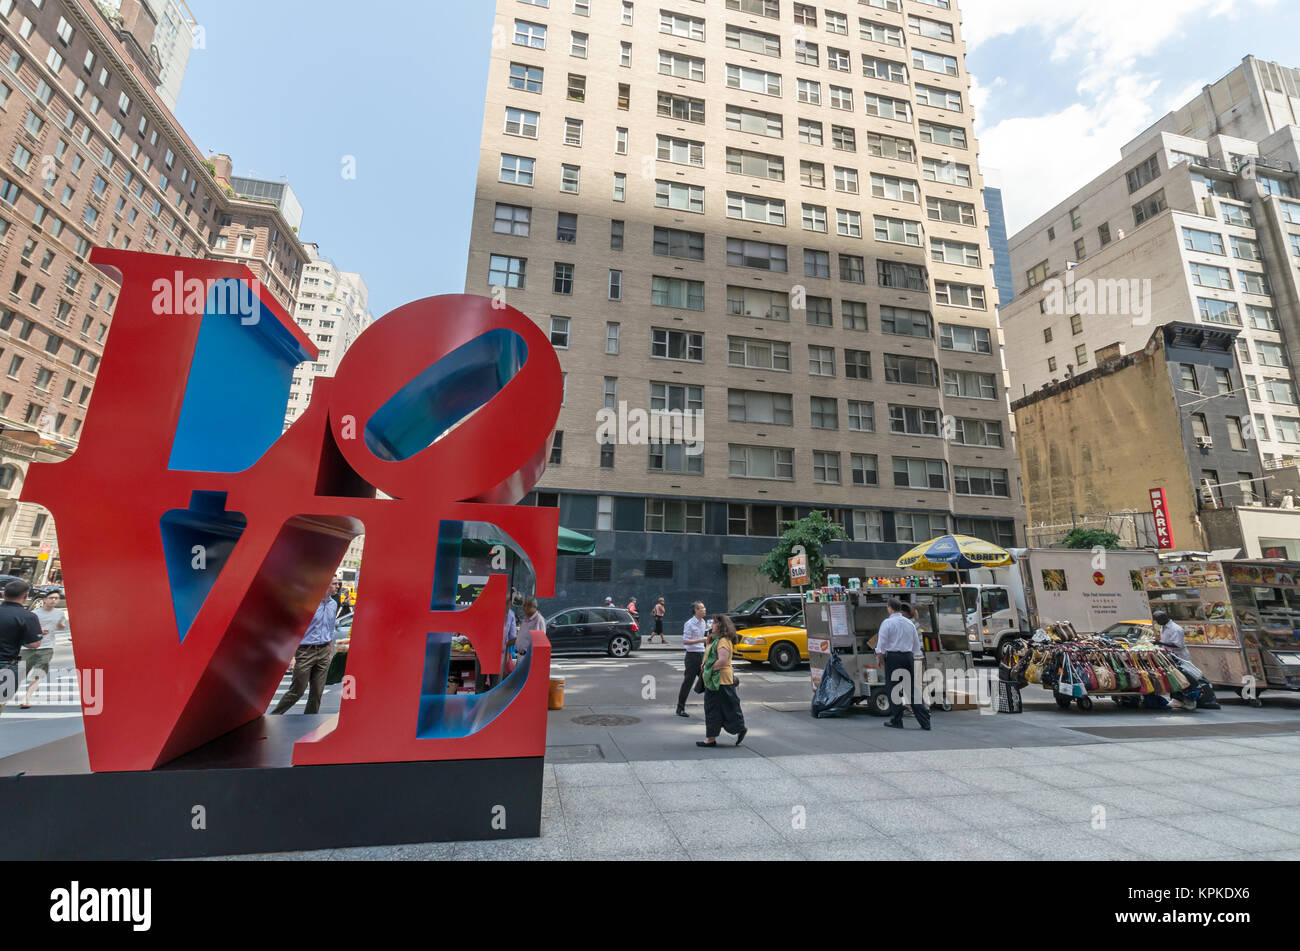 NEW YORK CITY - JULY 12: Love sculpture on July 12, 2012 in New York. LOVE is a sculpture by American artist Robert Indiana. It consists of the letter Stock Photo